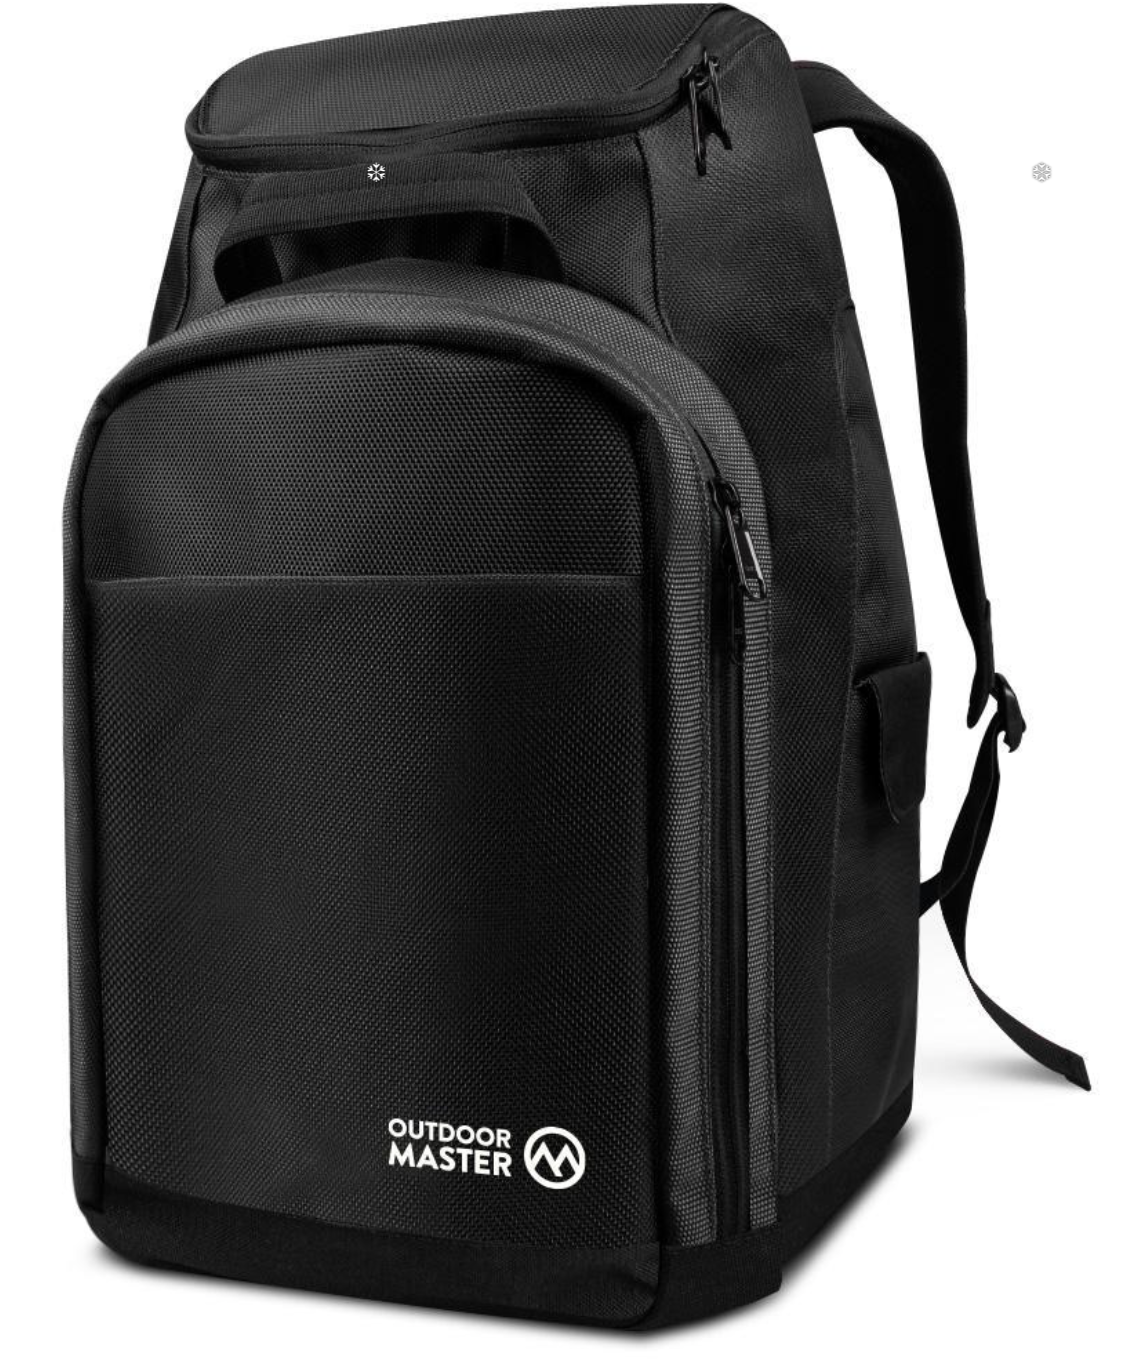 image outdoormaster-50l-lynx-boots-bag-jpg